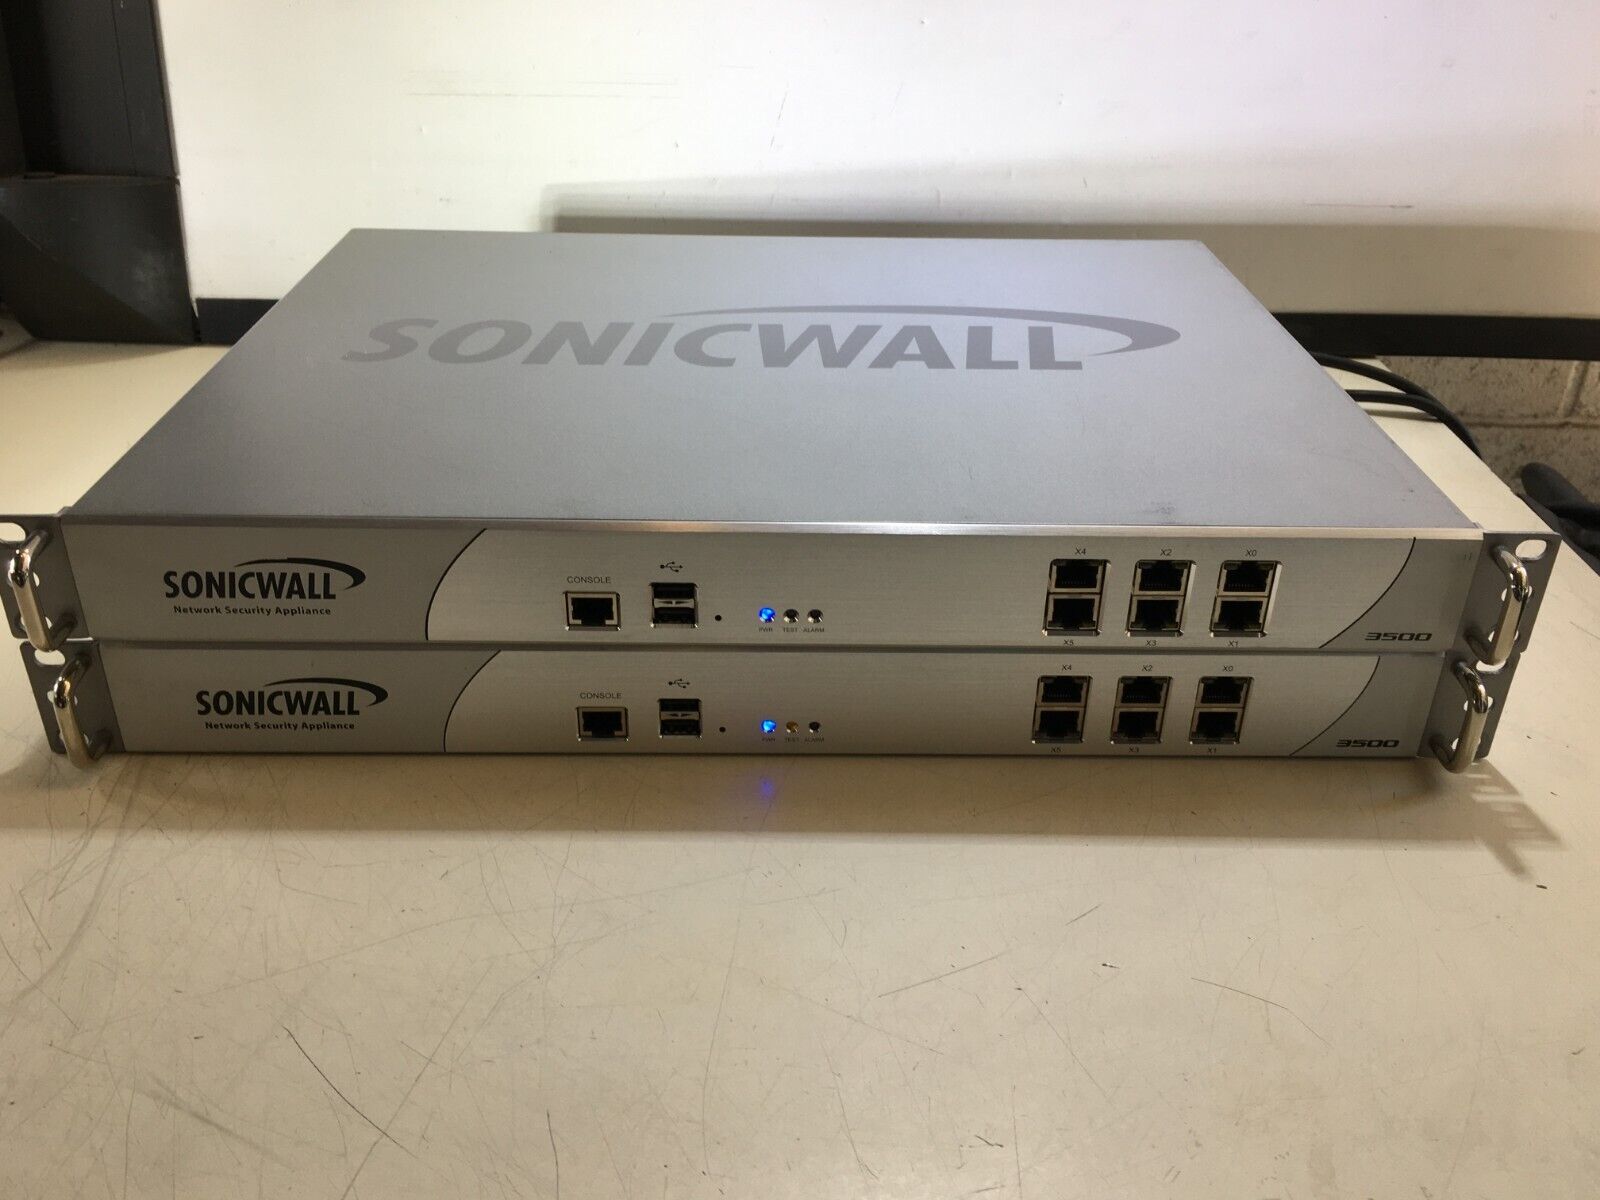 LOT OF 2:  SONICWALL NSA 3500 NETWORK SECURITY FIREWALL APPLIANCE - AS IS